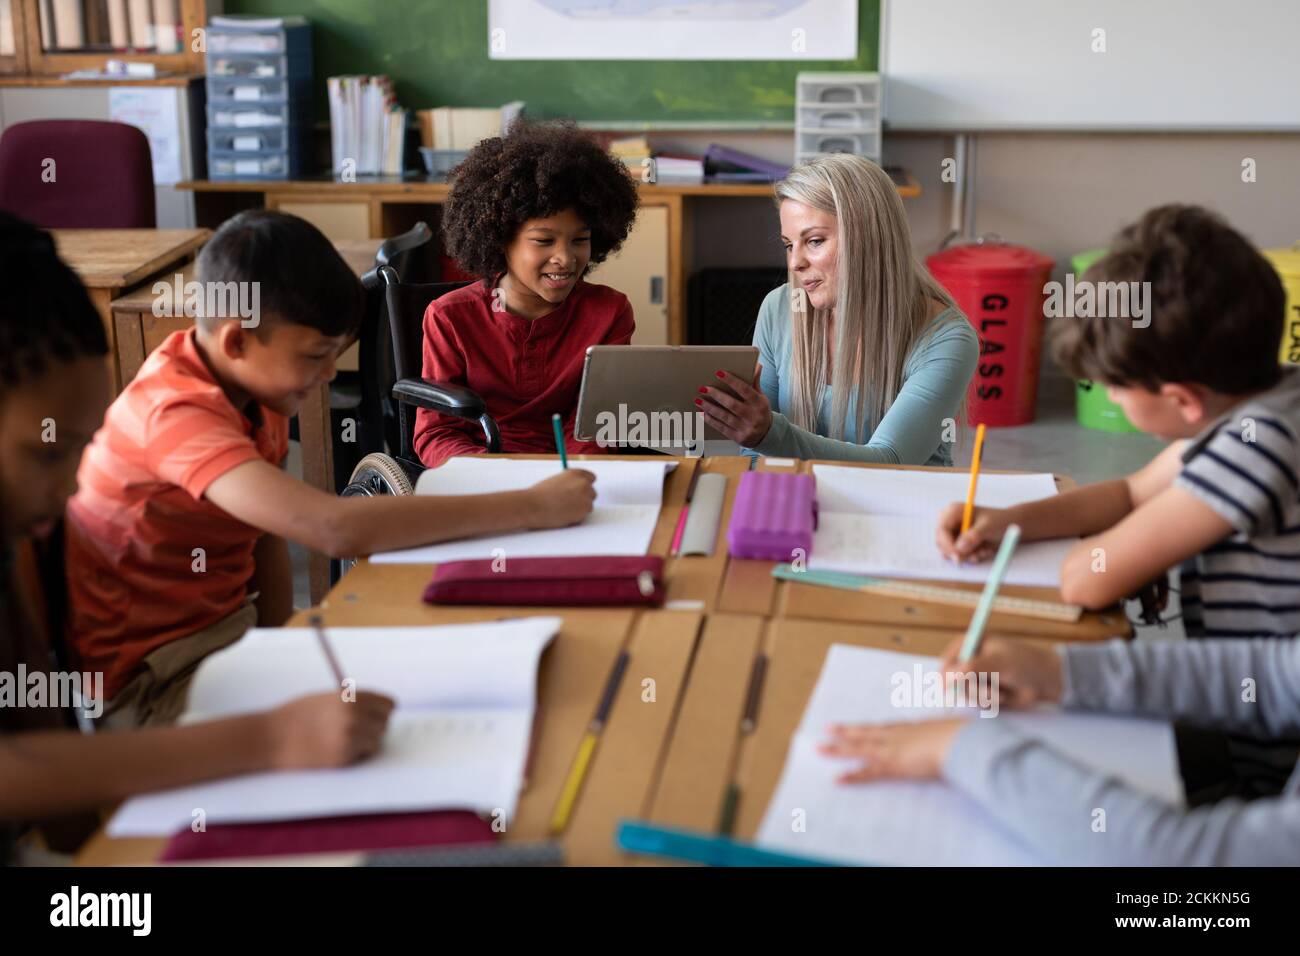 Female teacher with digital tablet teaching a disable boy in wheel chair at school Stock Photo